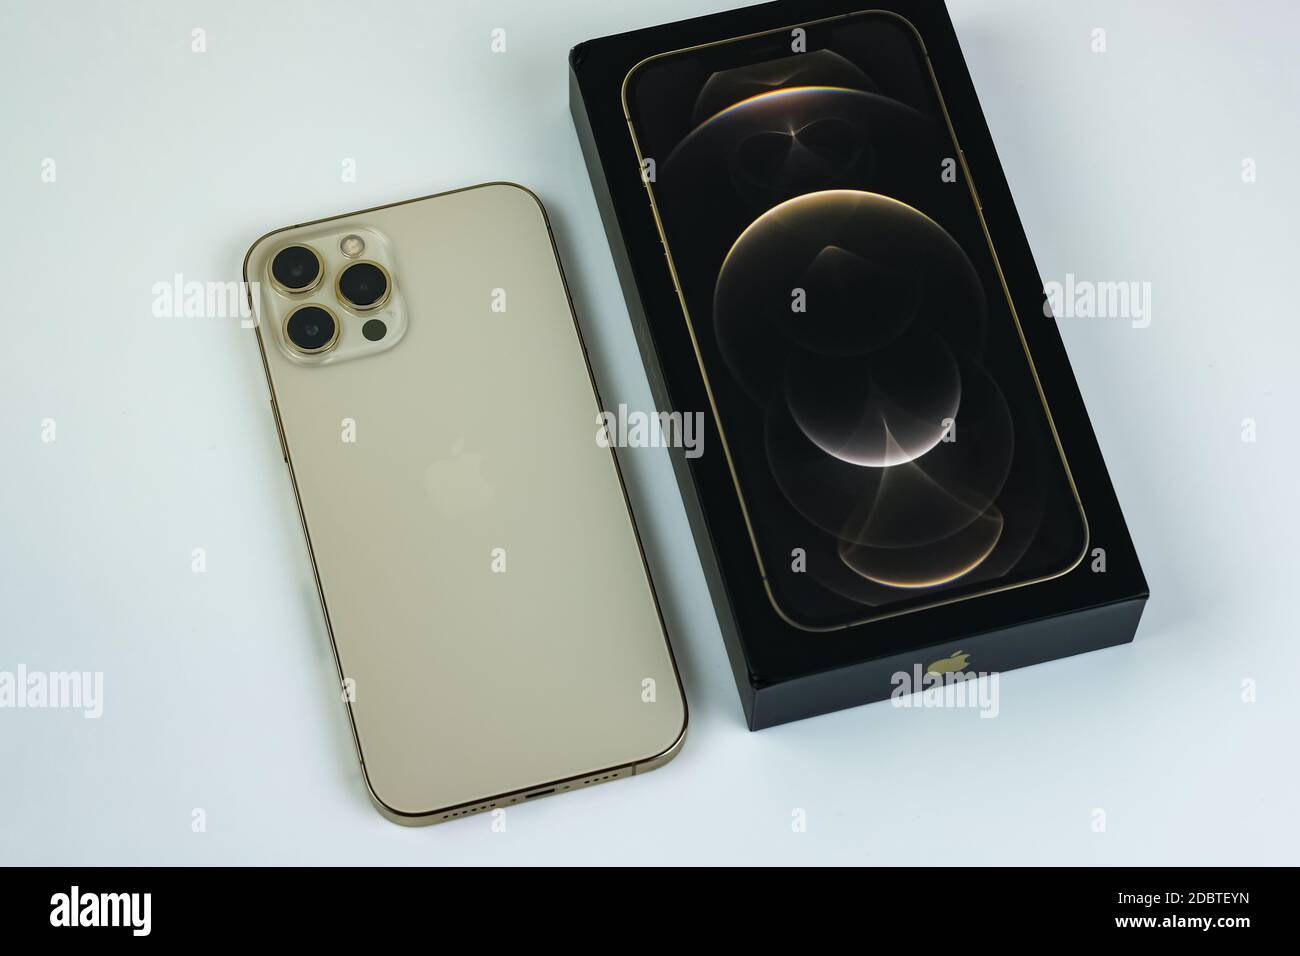 iPhone 12 Pro Max in Gold next to its box Stock Photo - Alamy